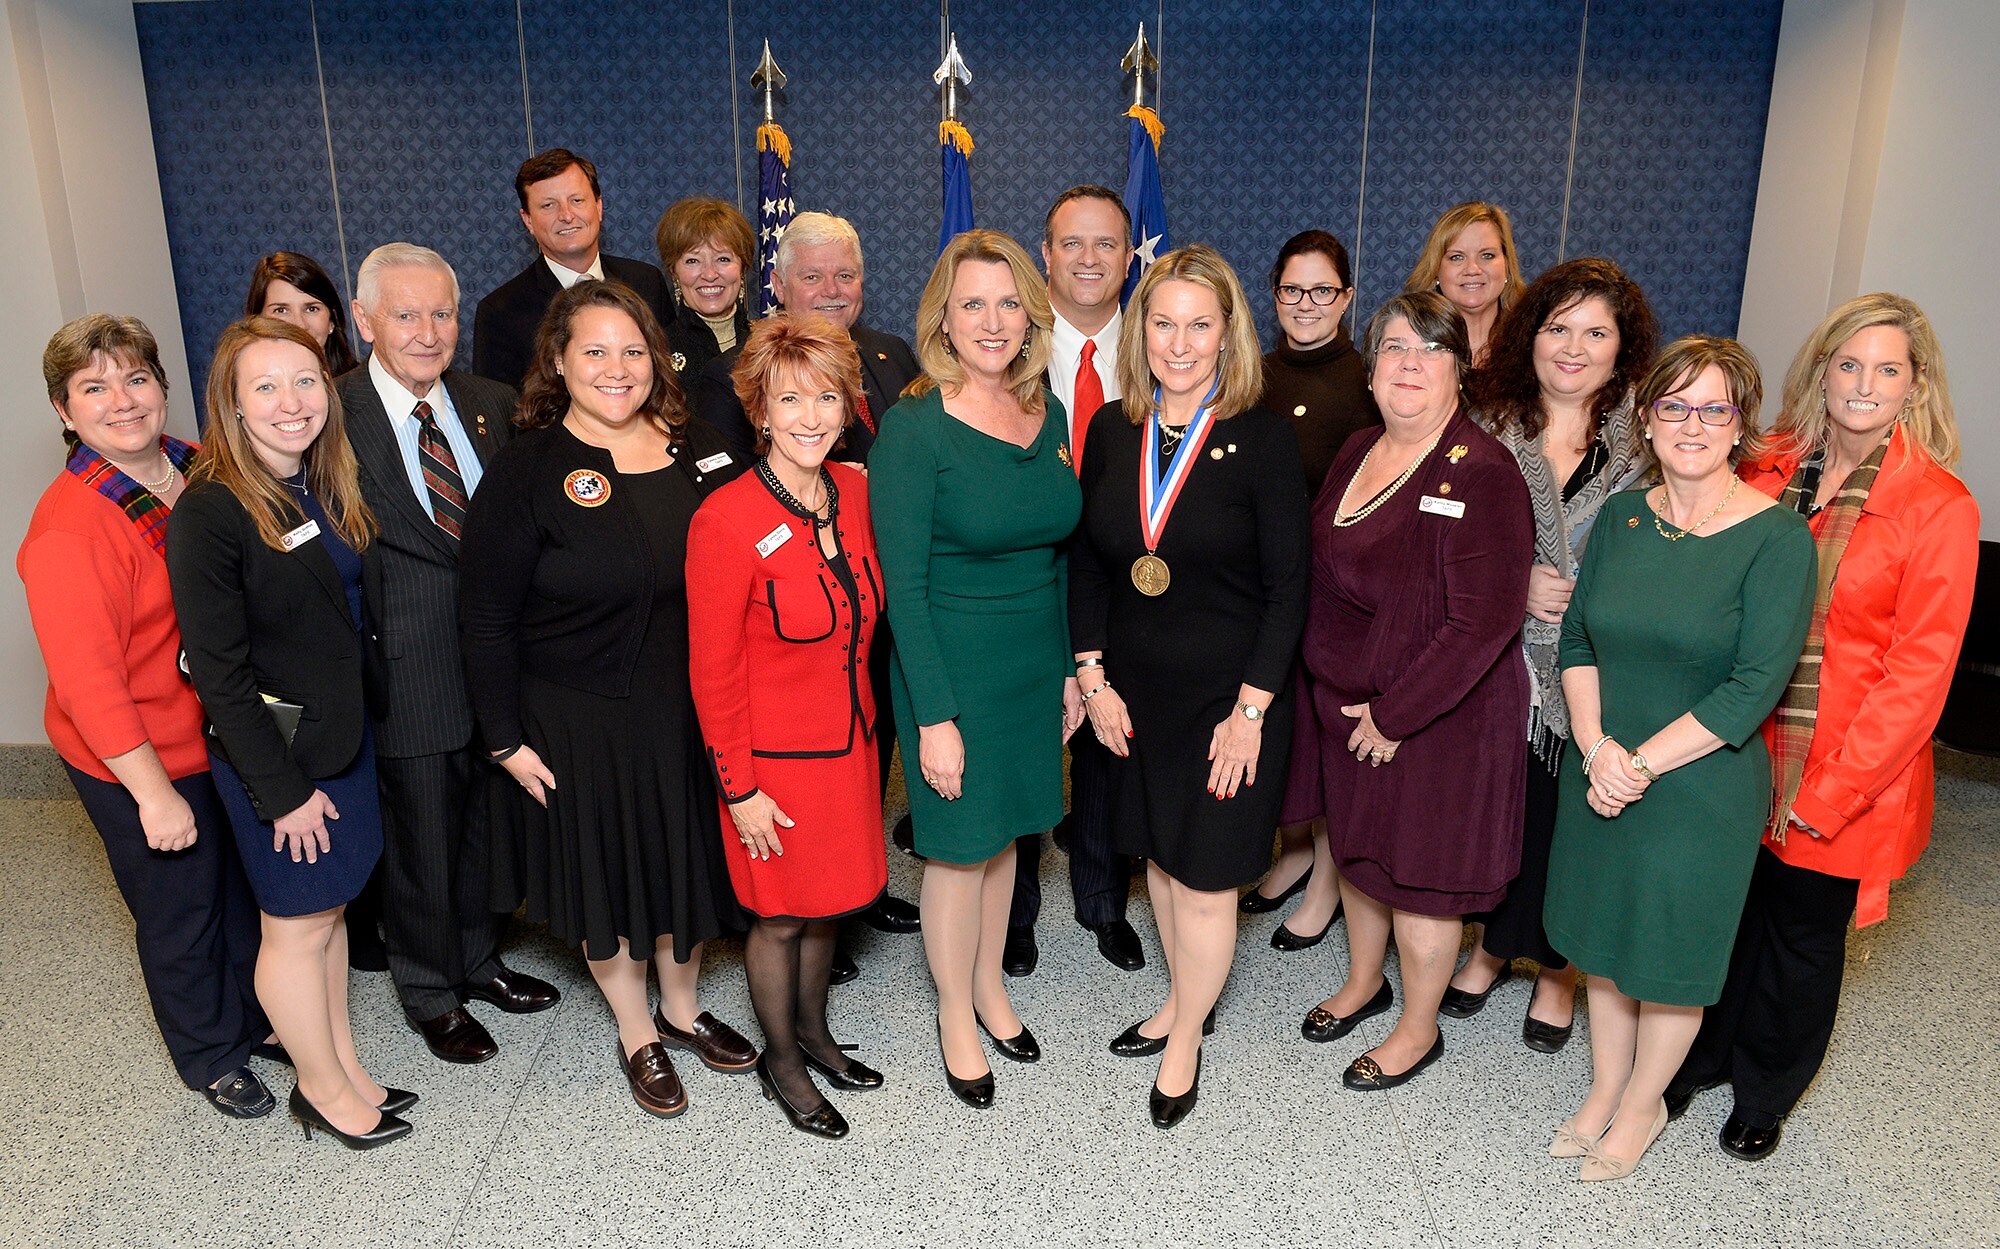 Secretary of the Air Force Deborah Lee James, center, congratulates Bonnie Carroll, the founder and president of the Tragedy Assistance Program for Survivors, during a ceremony honoring Carroll with the Zachary and Elizabeth Fisher Distinguished Civilian Humanitarian Award in the Pentagon, Dec. 1, 2015. With James and Carroll are TAPS members who attended the ceremony. (U.S. Air Force photo/Scott M. Ash)